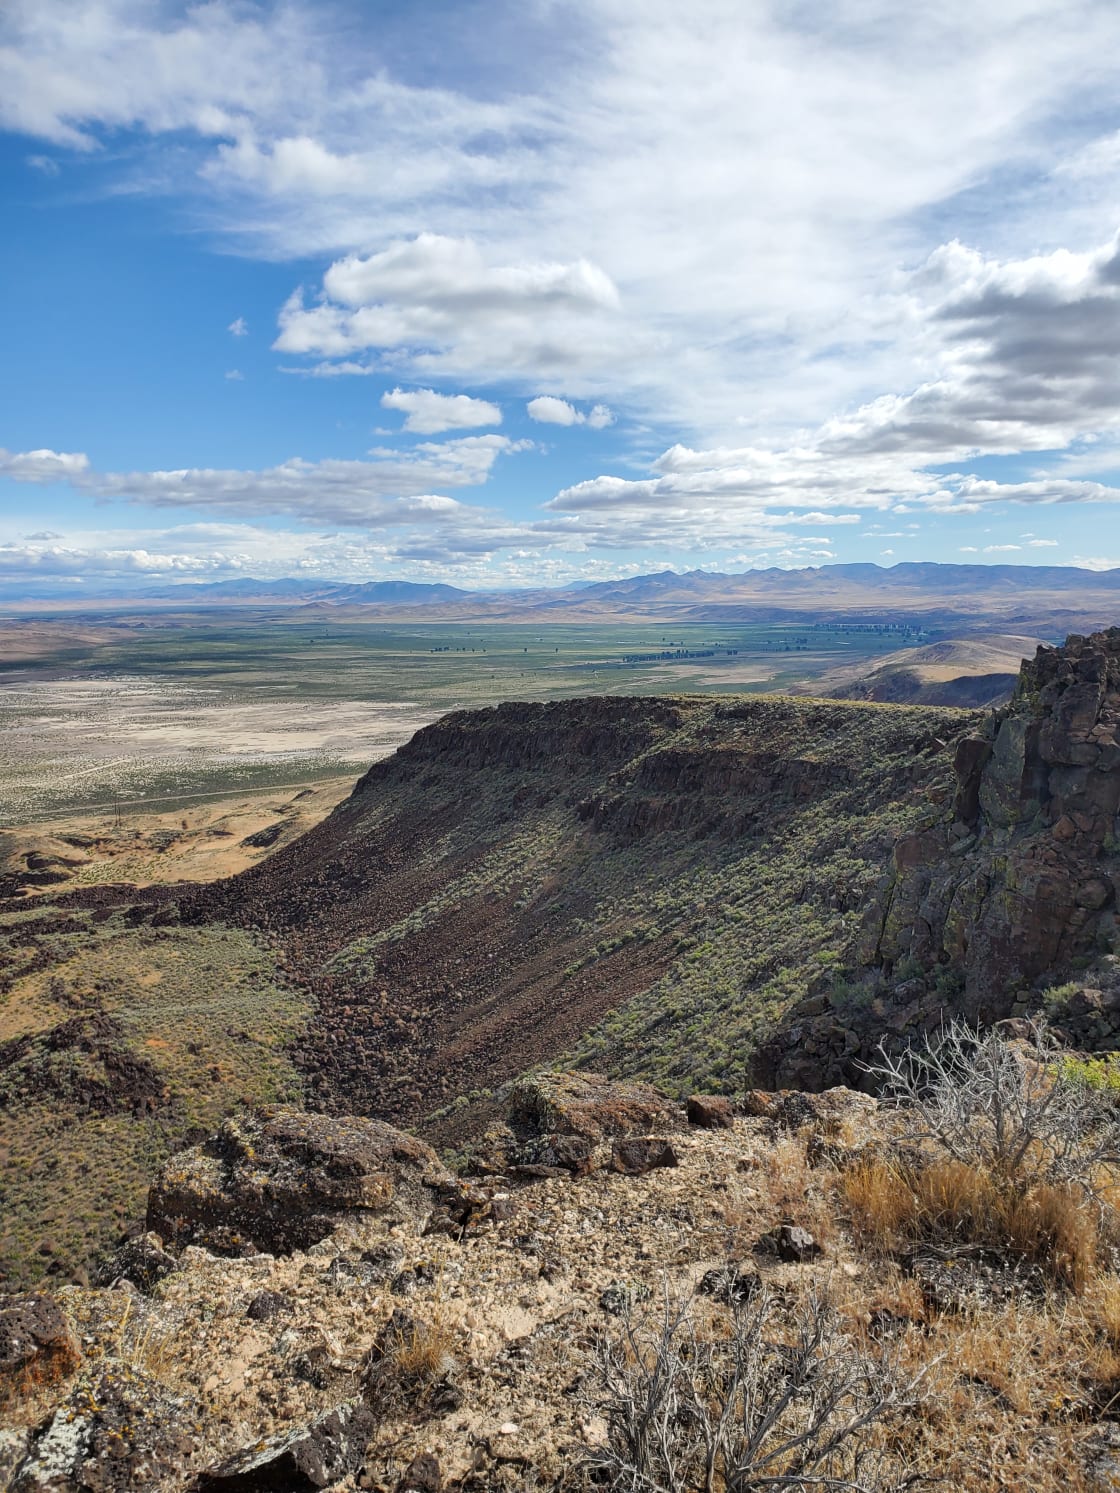 Hike to the top of the hill on BLM land adjacent to the campground for a fantastic 360 view of Whirlwind and Cresent Valleys.